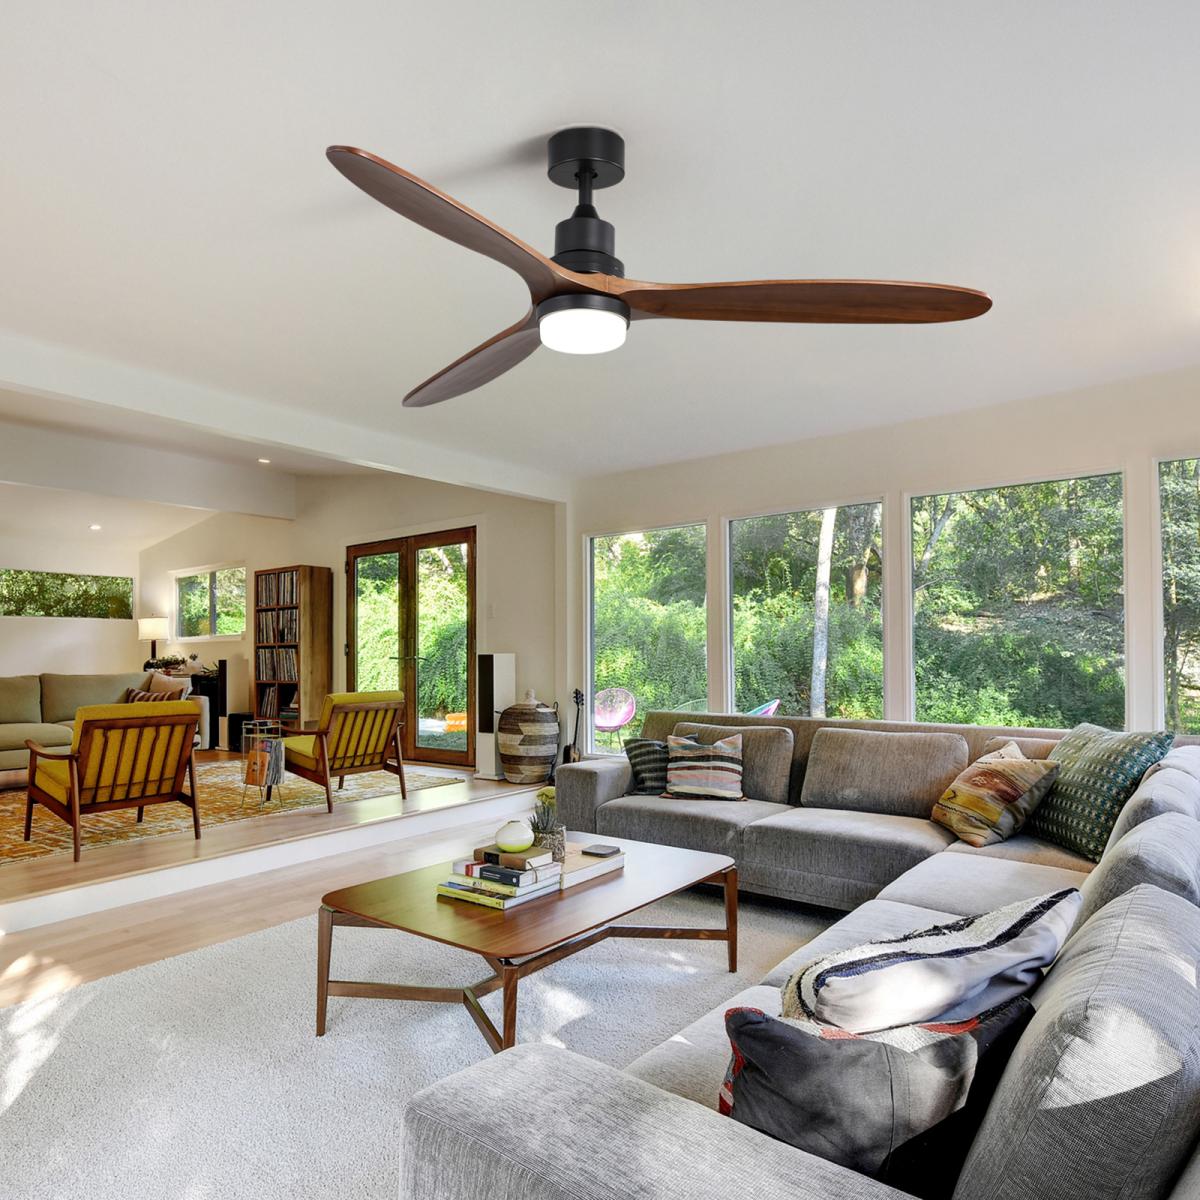 60 Inch Ceiling Fan With Lights 3 Solid Wood Fan Blade Noiseless Reversible Motor Remote Control